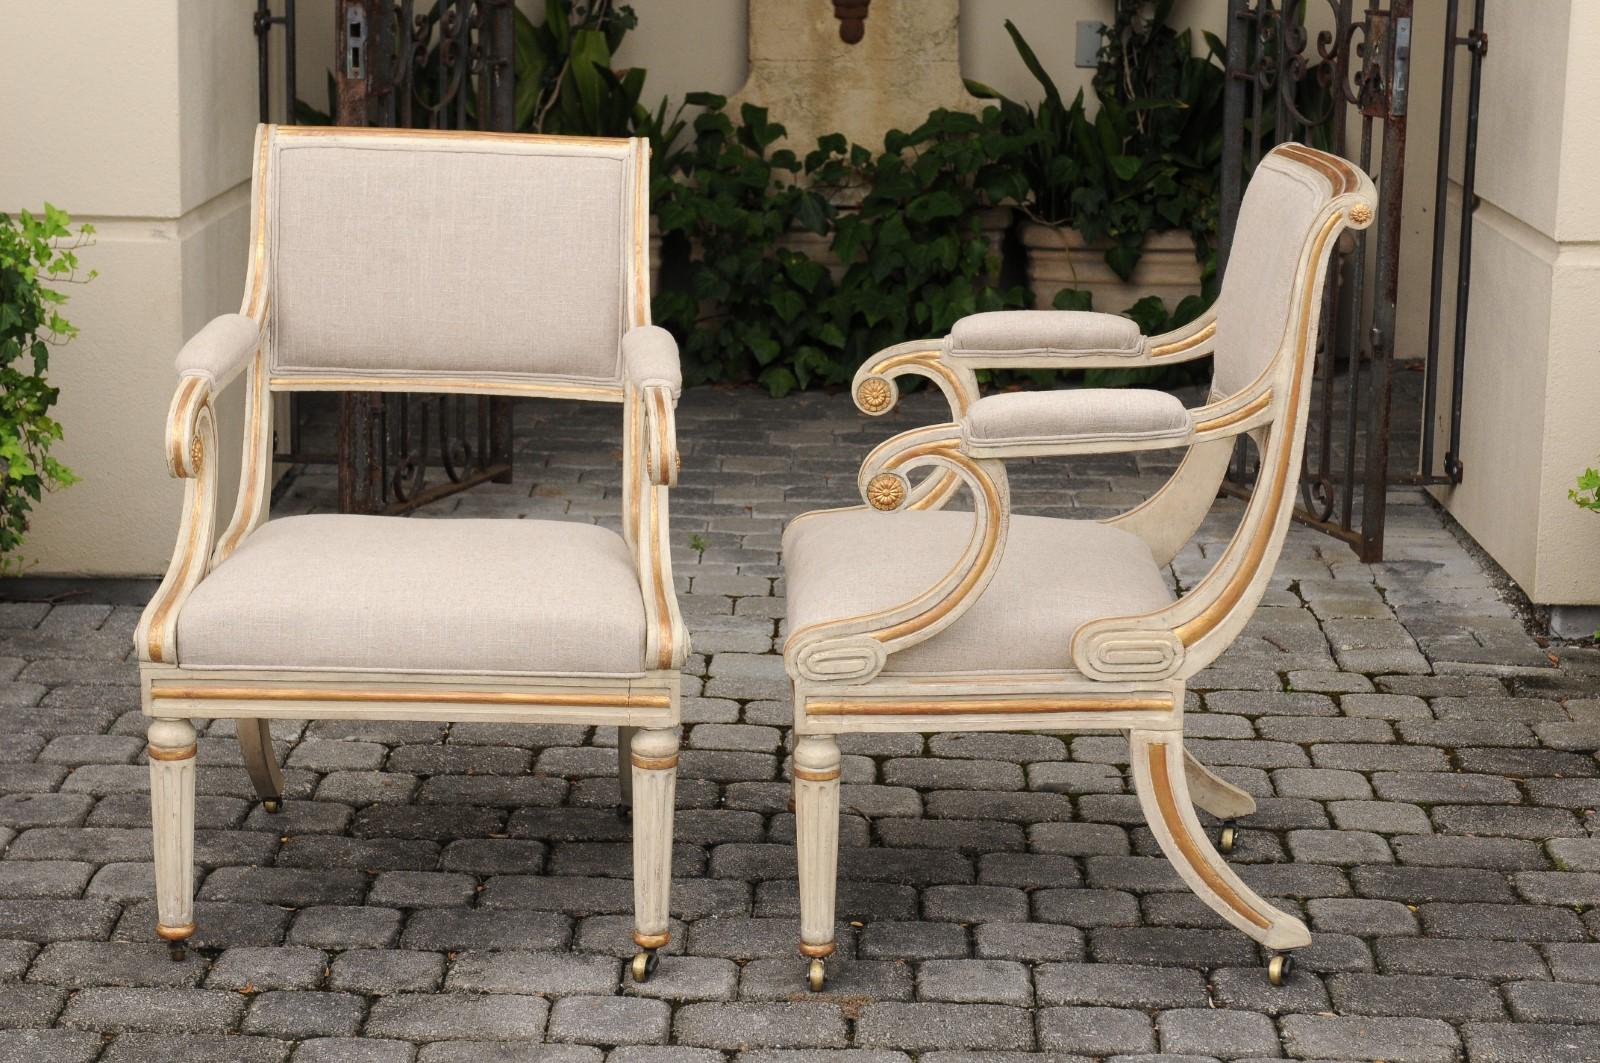 Pair of English 1900s Regency Style Painted and Parcel-Gilt Armchairs on Casters 4